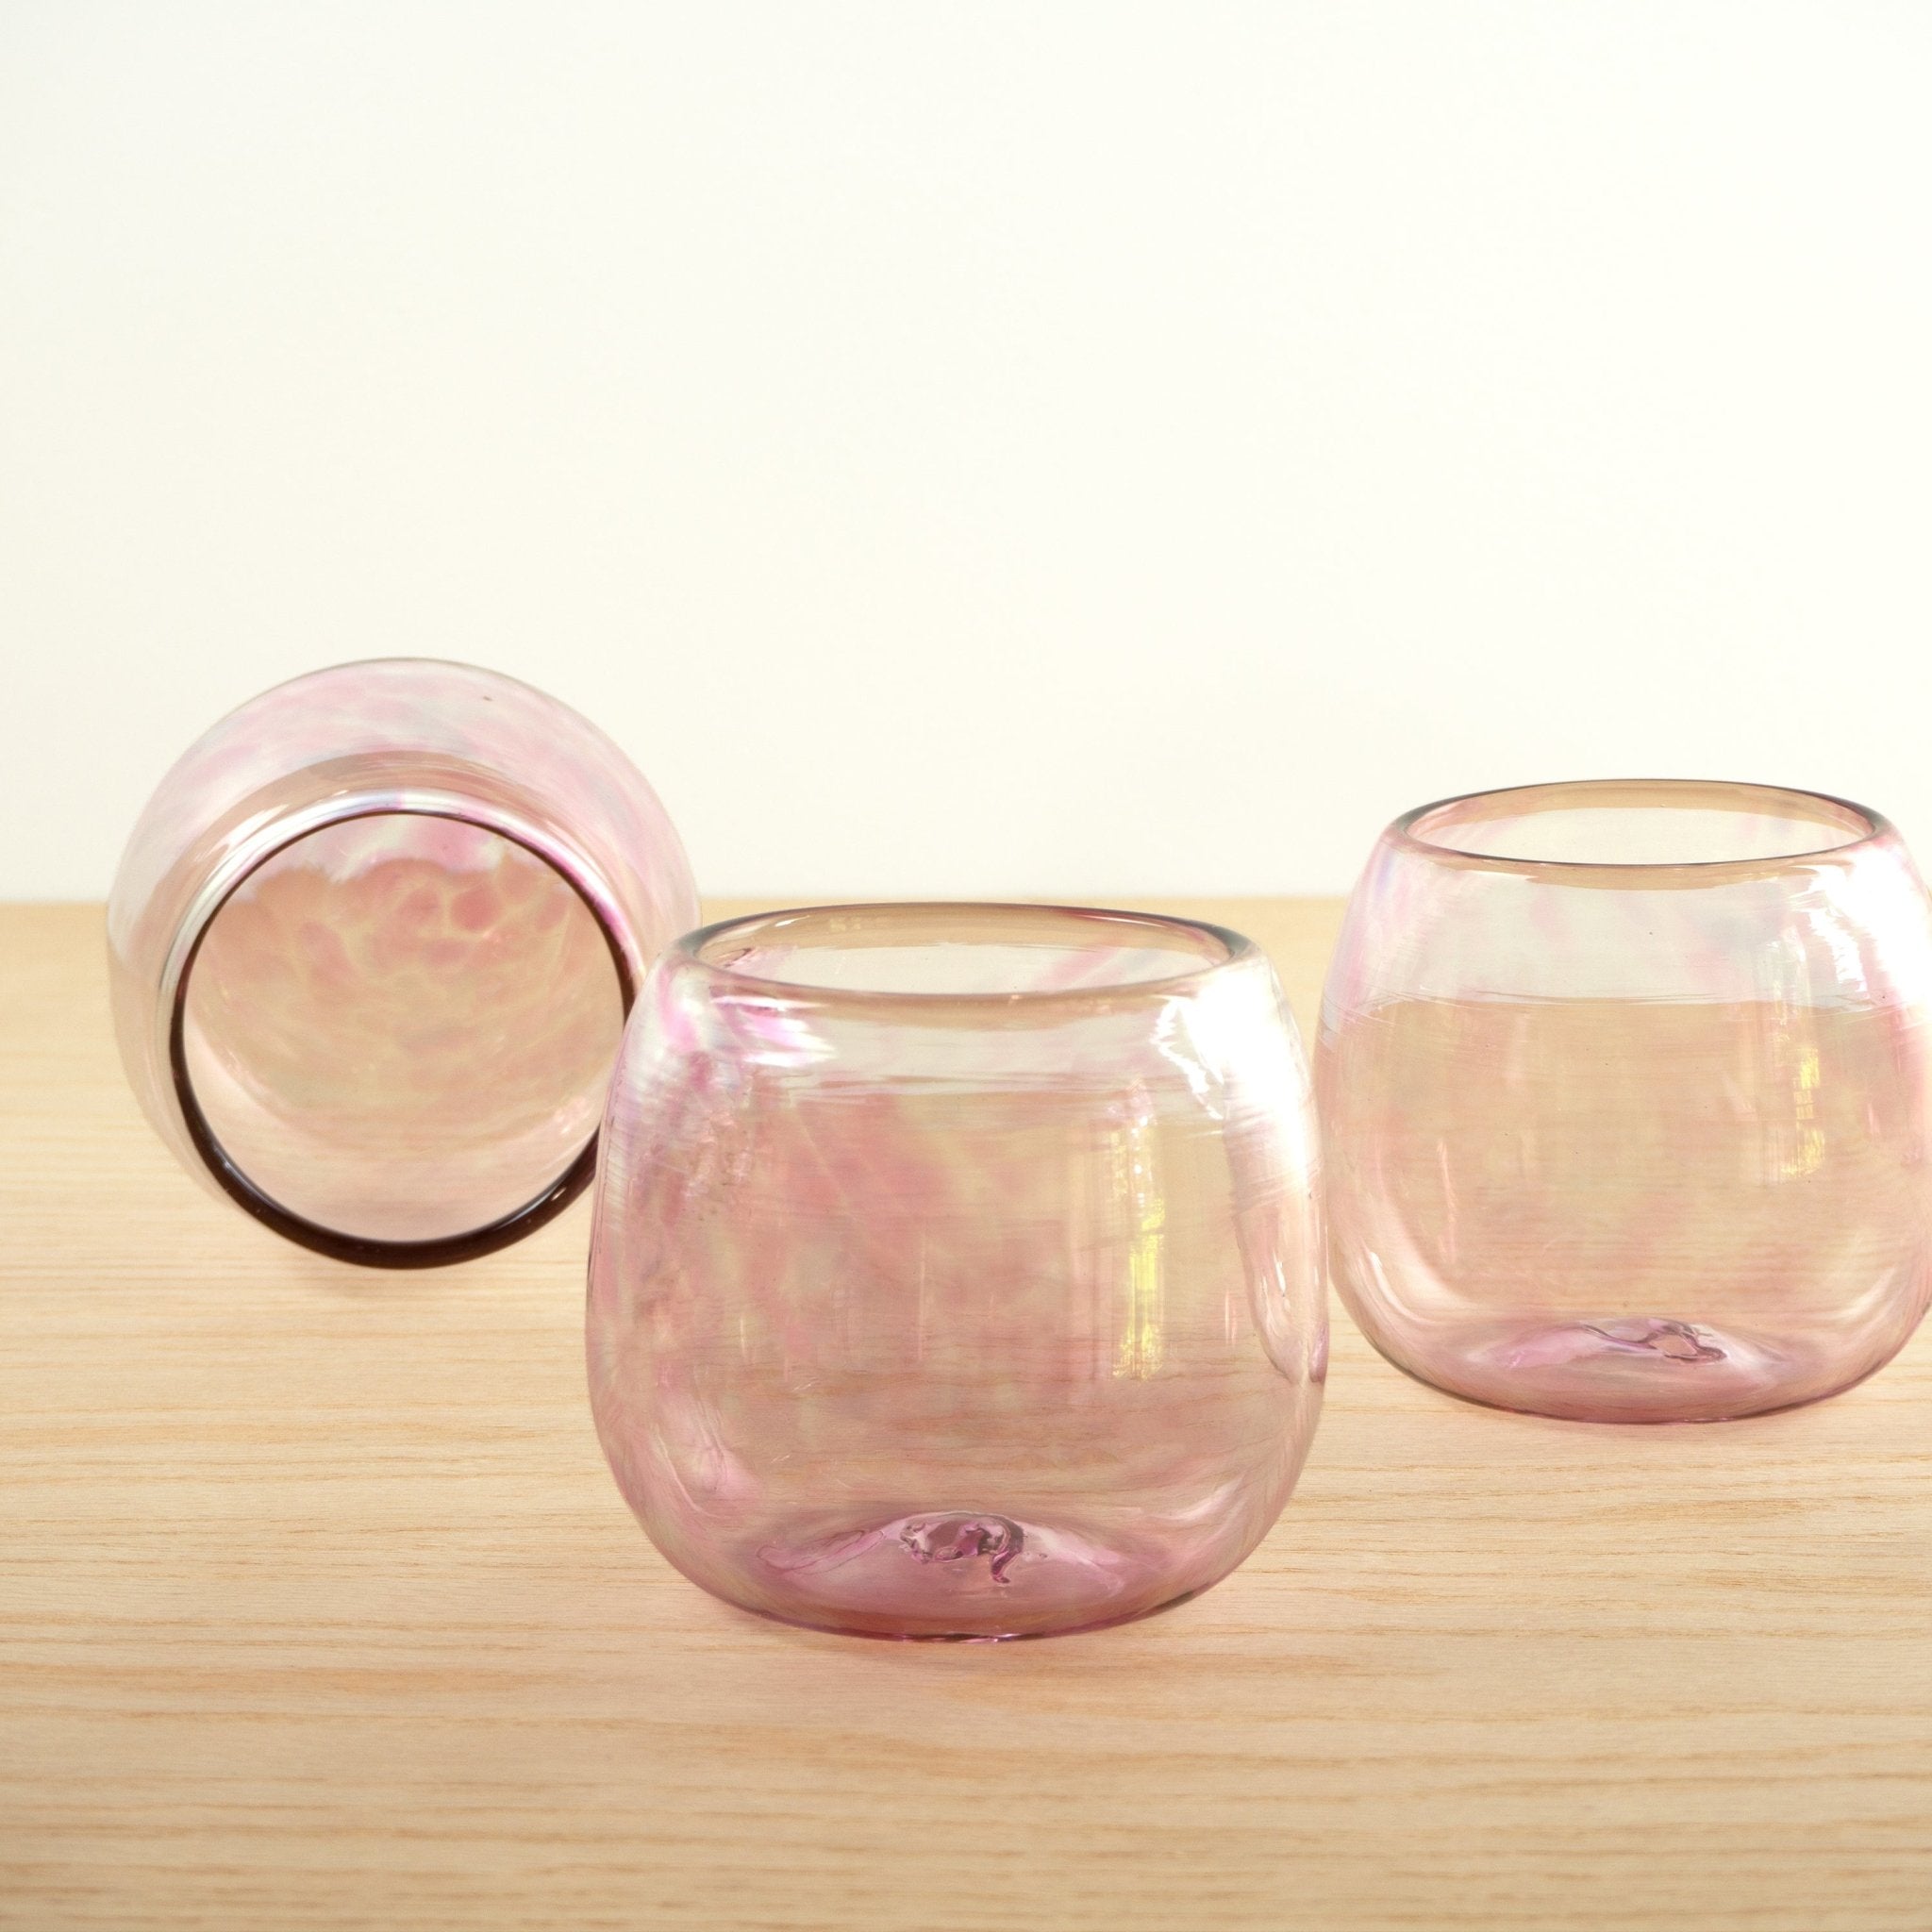 Three handblown round pink glasses arranged on a wooden table